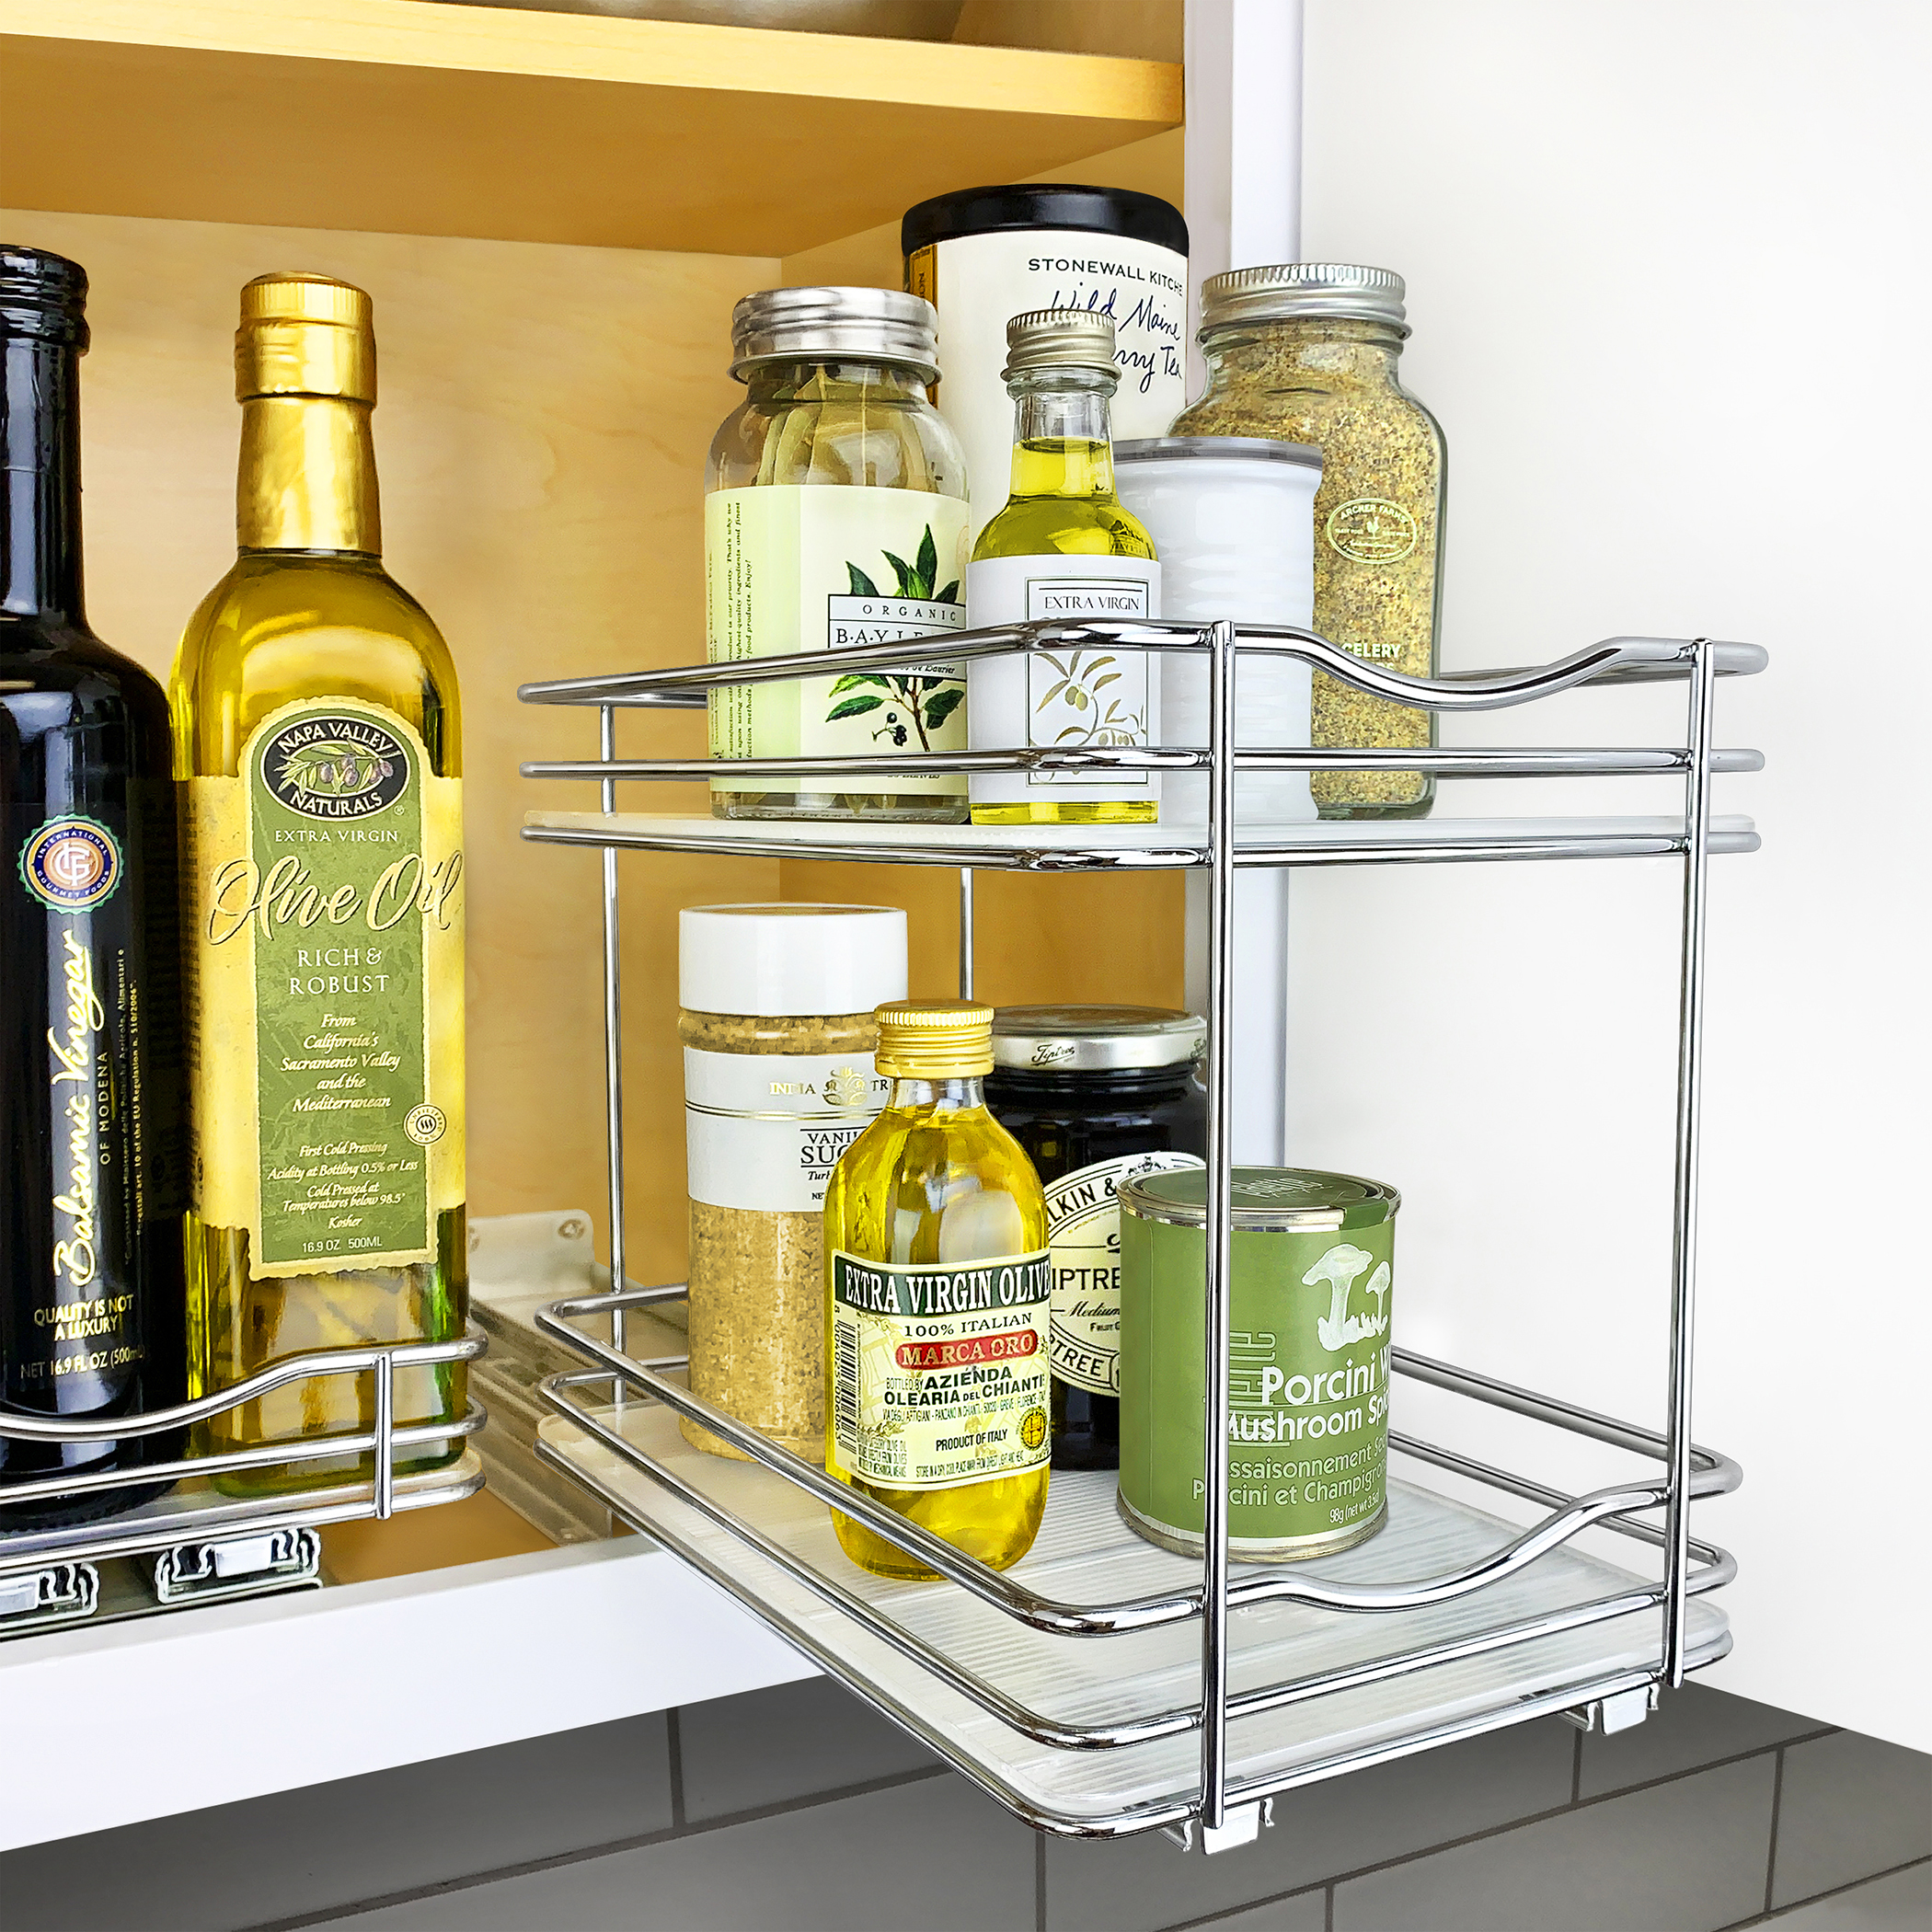 FDWYTY Spice Rack Organizer, Pull & Rotate Cabinet Shelf with 2  Double-Decker Shelves | Non-Skid Base, Organization and Storage for  Seasoning Jars